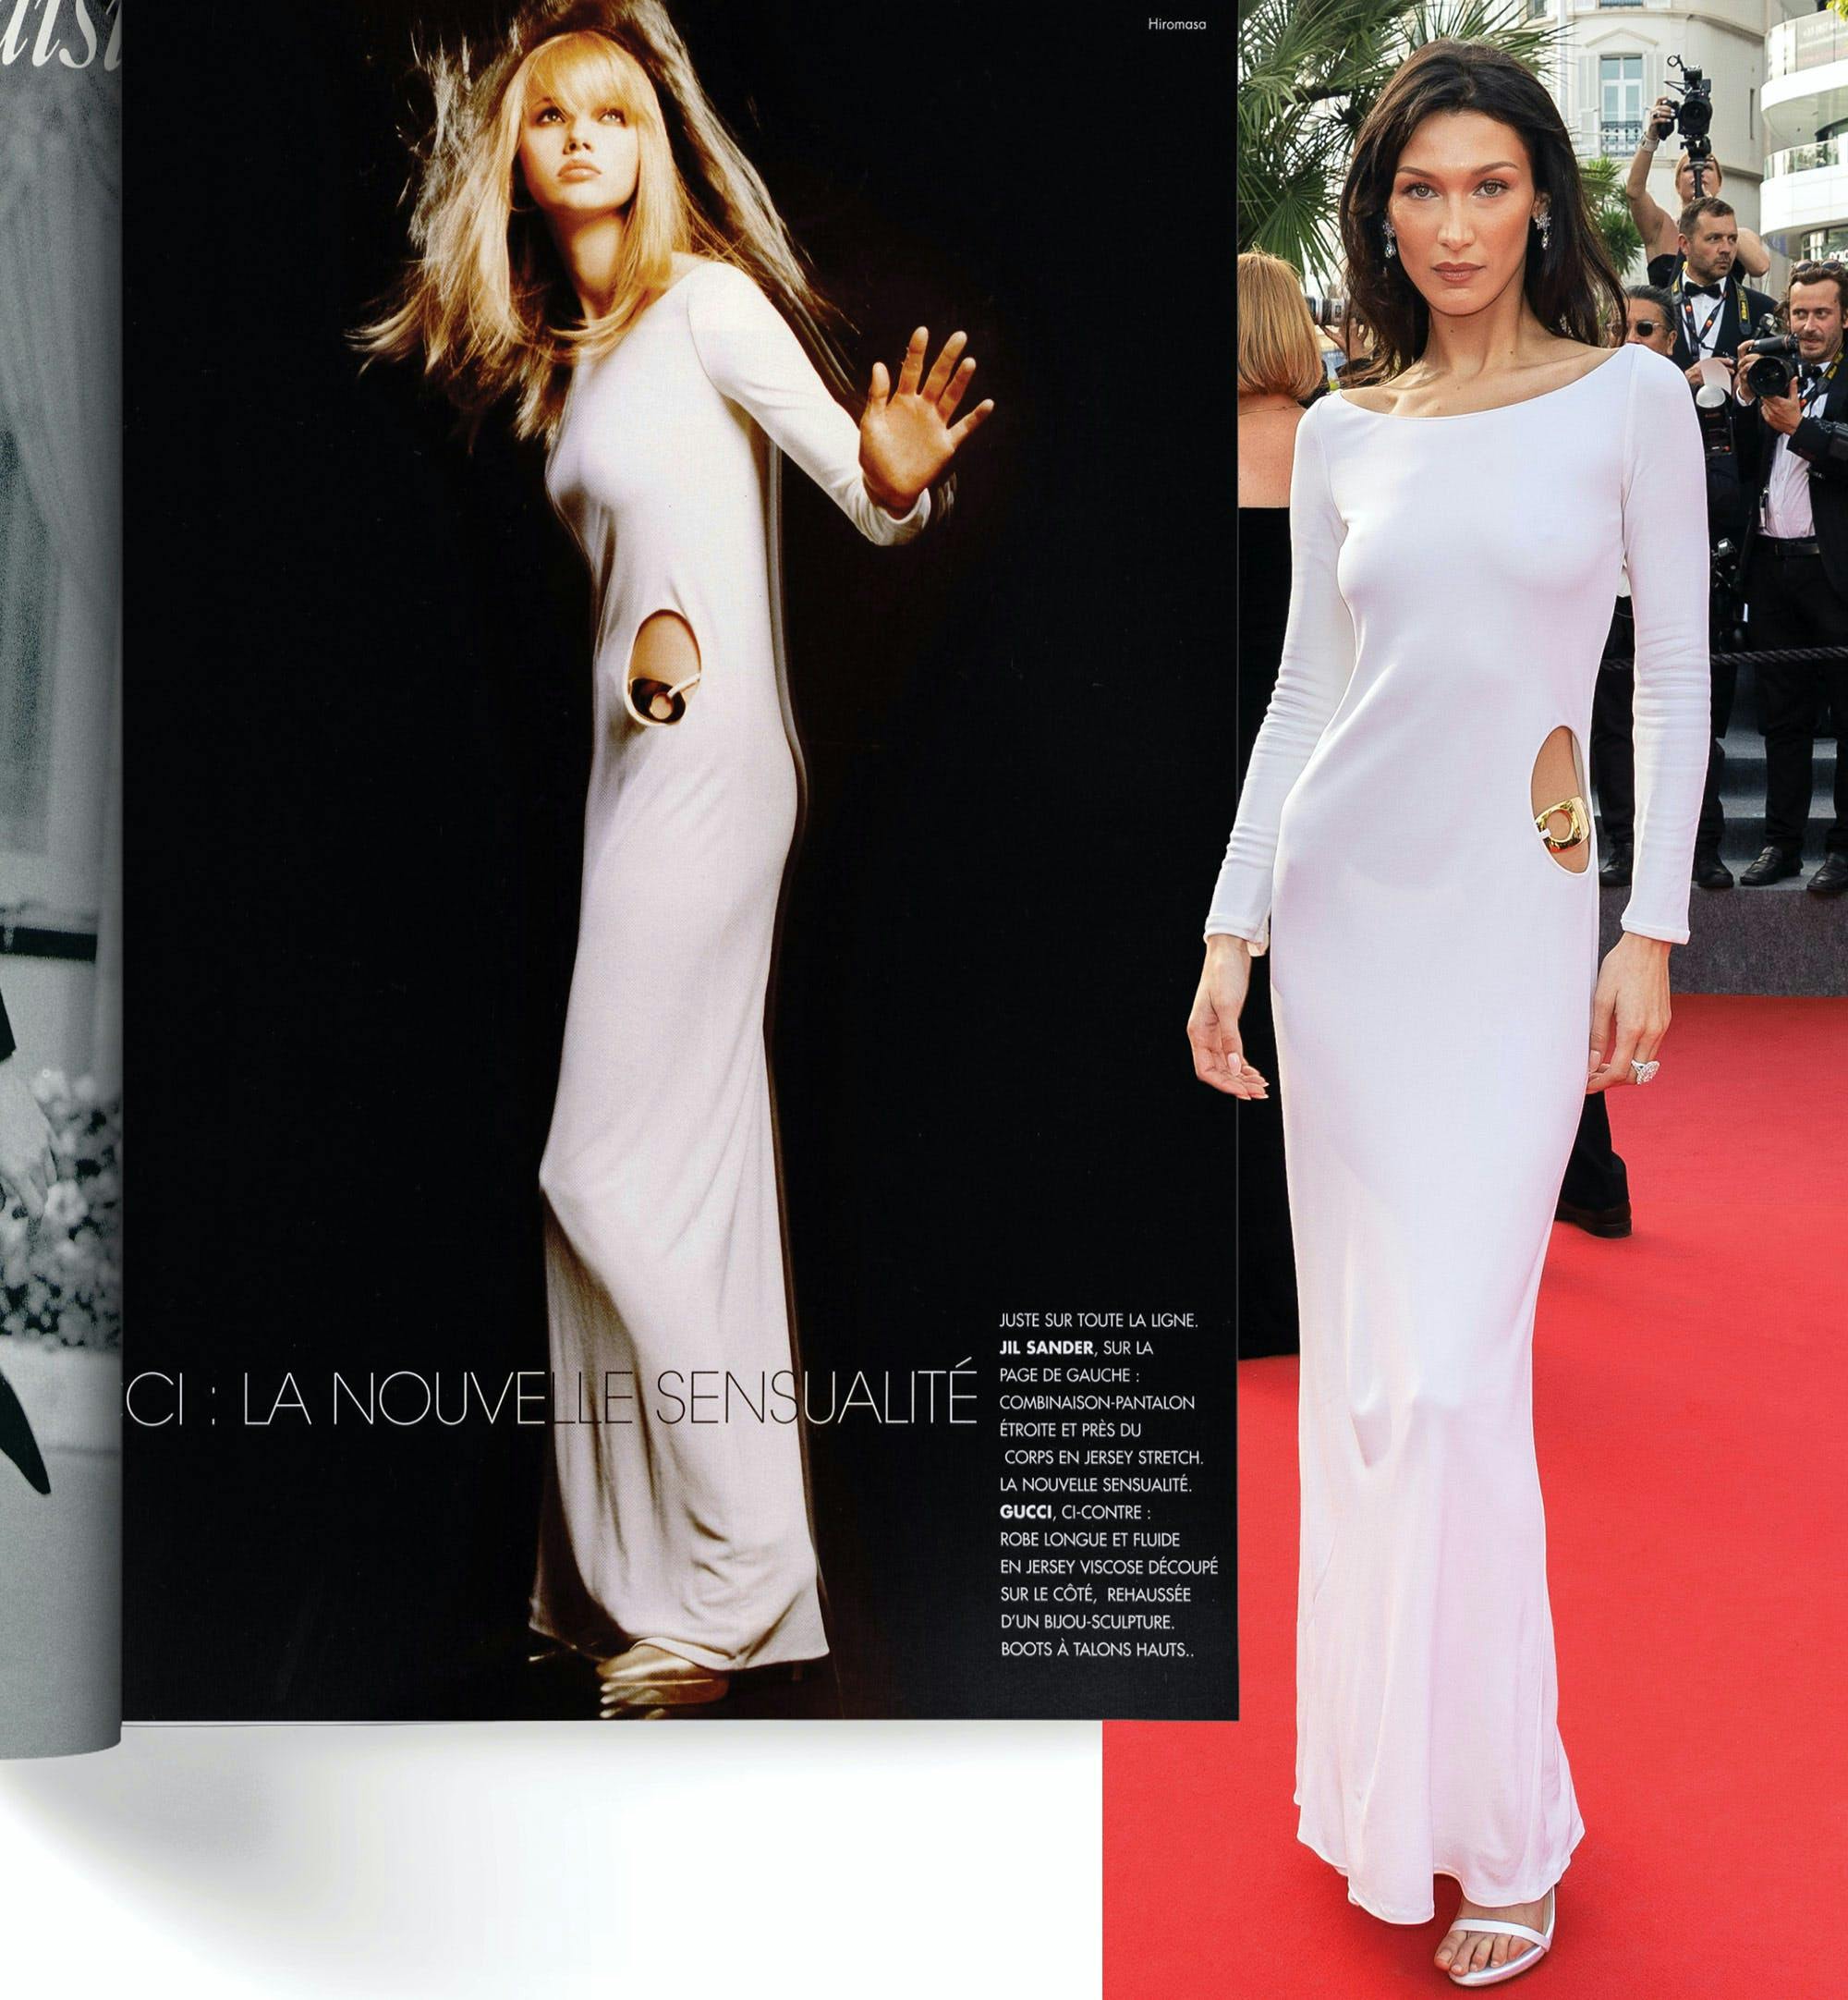 Model wearing Gucci in a 1996 issue of L’OFFICIEL; Bella Hadid at the 75th Annual Cannes Film Festival. Photo by Marc Piasecki